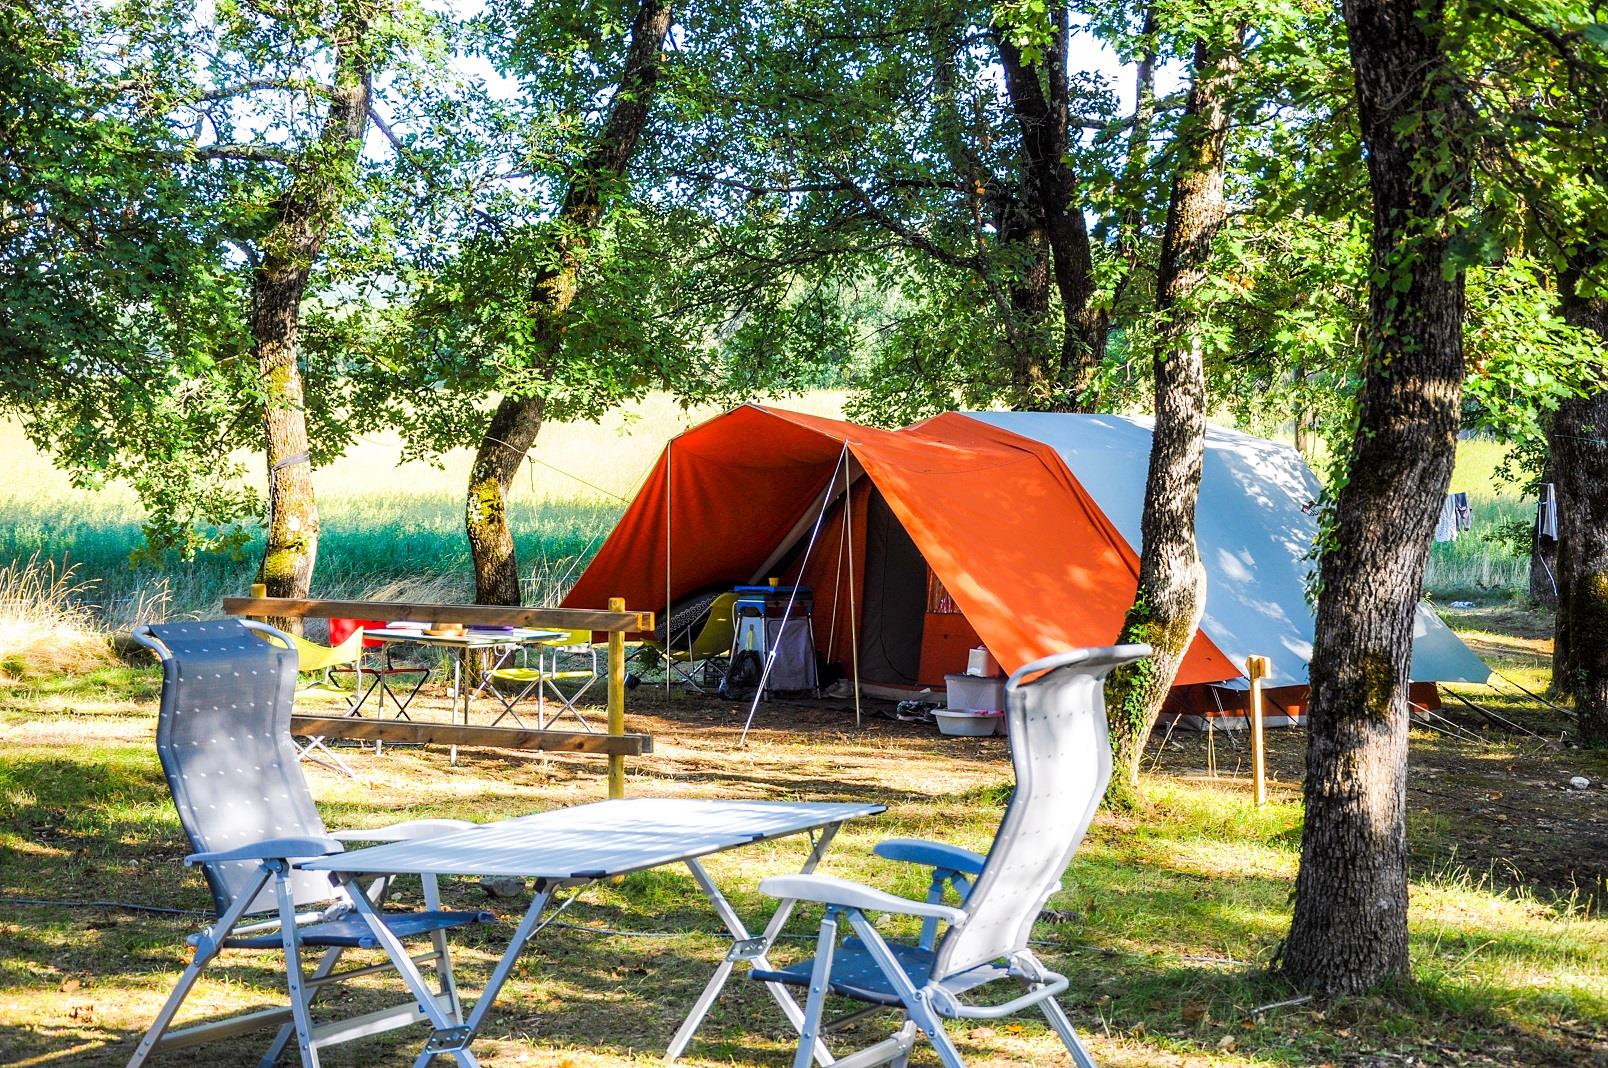 Pitch - Confort Pitch Xxl 150M², Including 10A Electricty - Camping L'Ombrage